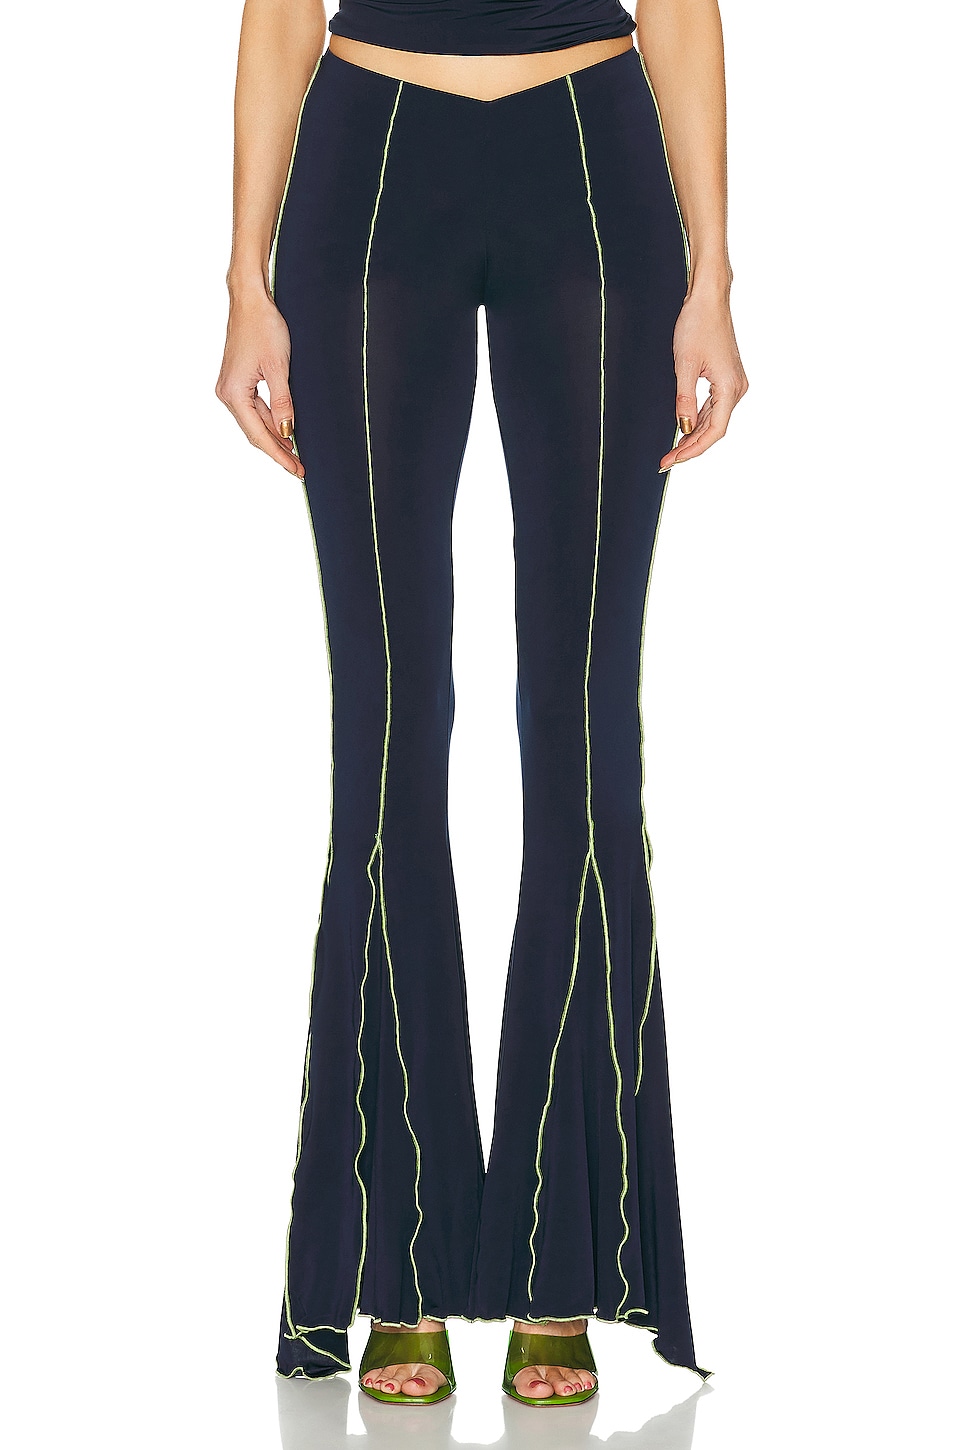 Image 1 of SIEDRES Luse Flared Pant in Navy